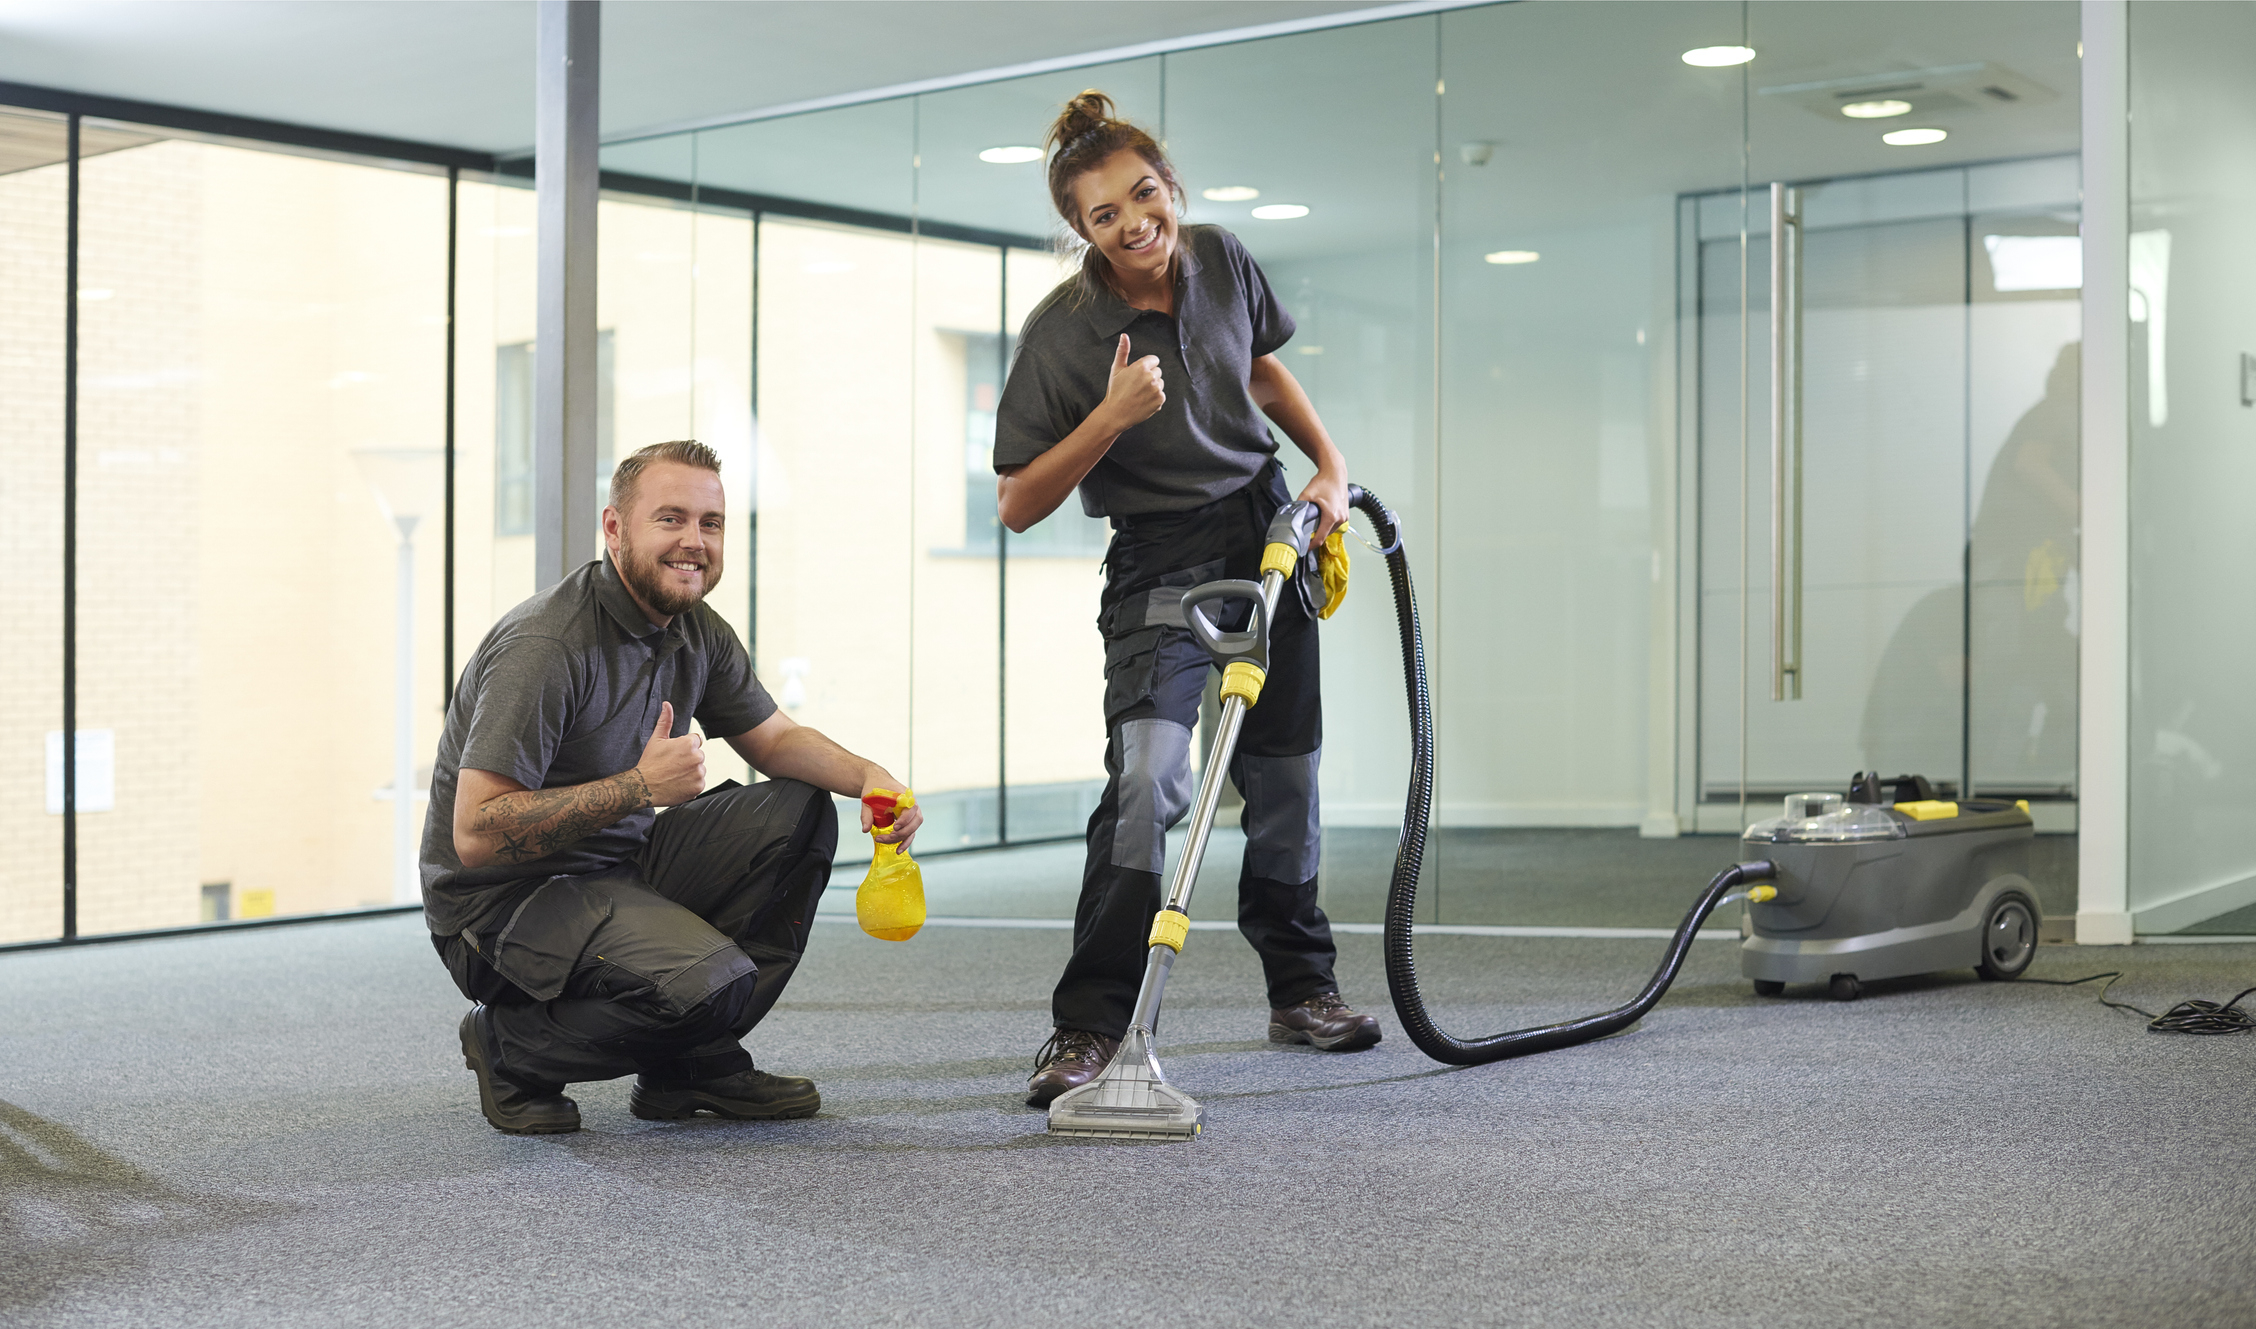 Carpet cleaners in an office building giving the thumbs-up